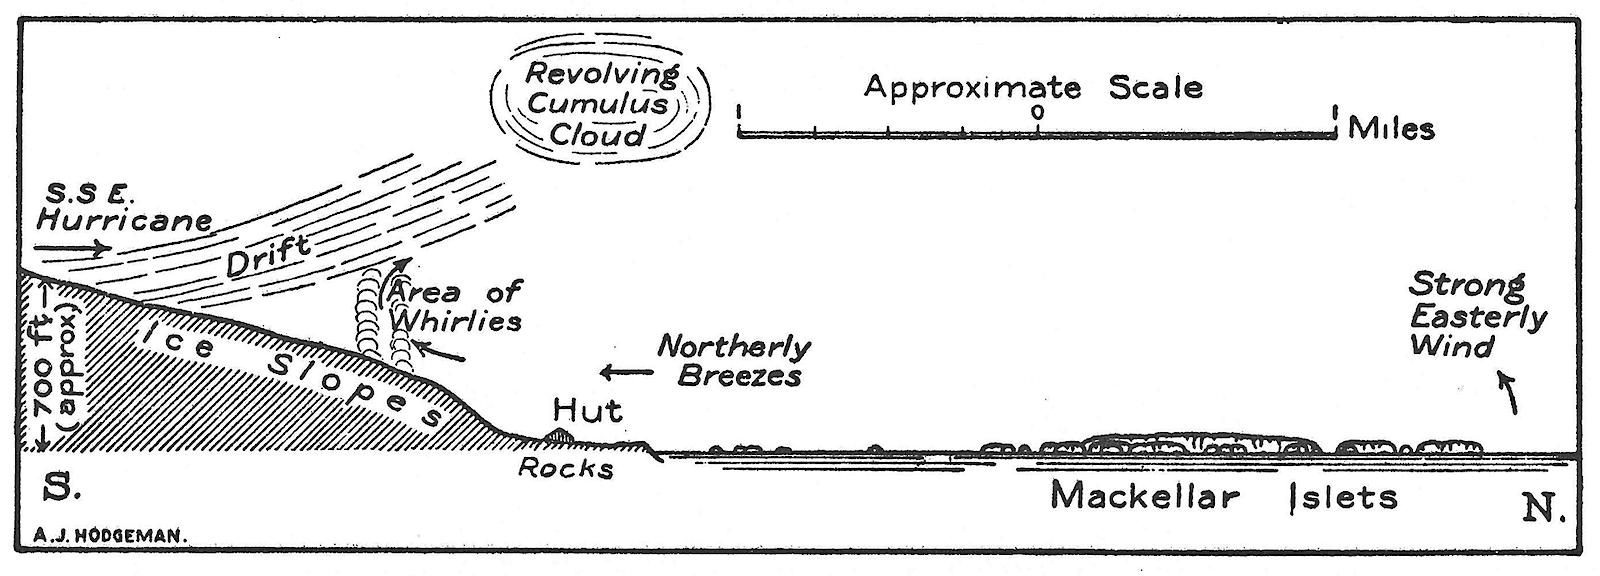 A diagrammatic sketch illustrating the meteorological conditions at the main base, noon, September 6, 1913.